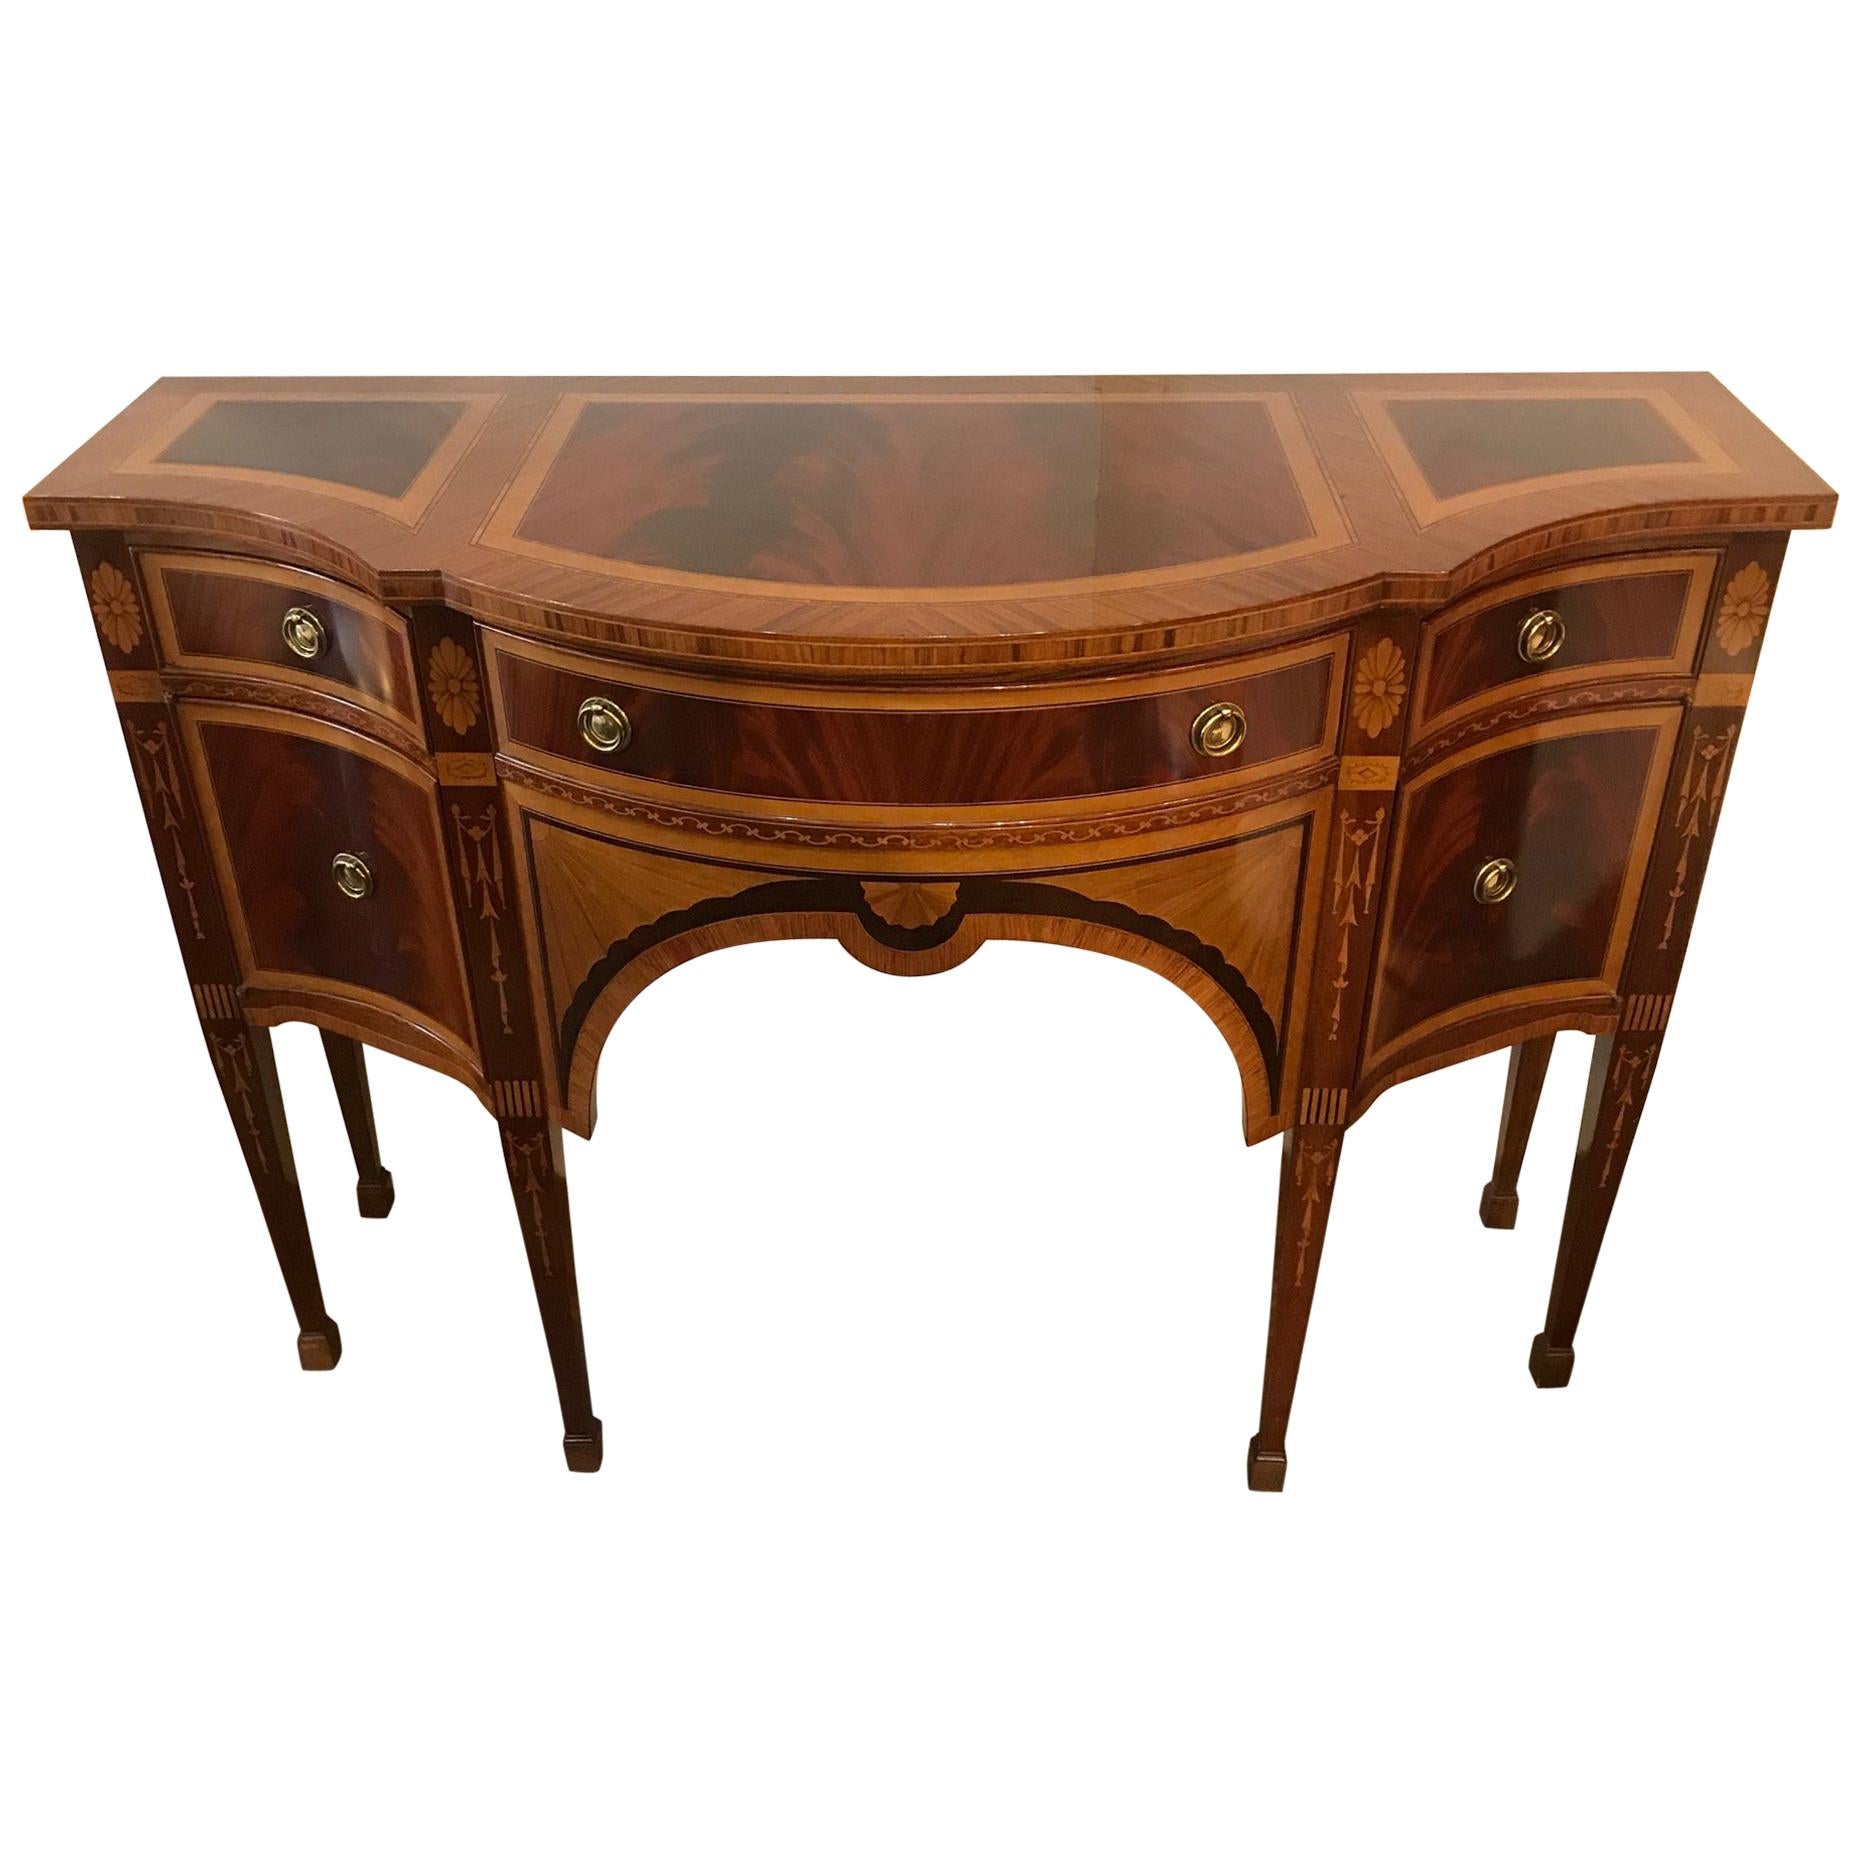 Superb Ornately Inlaid Mixed Wood Console Sideboard by Colombo Mobili